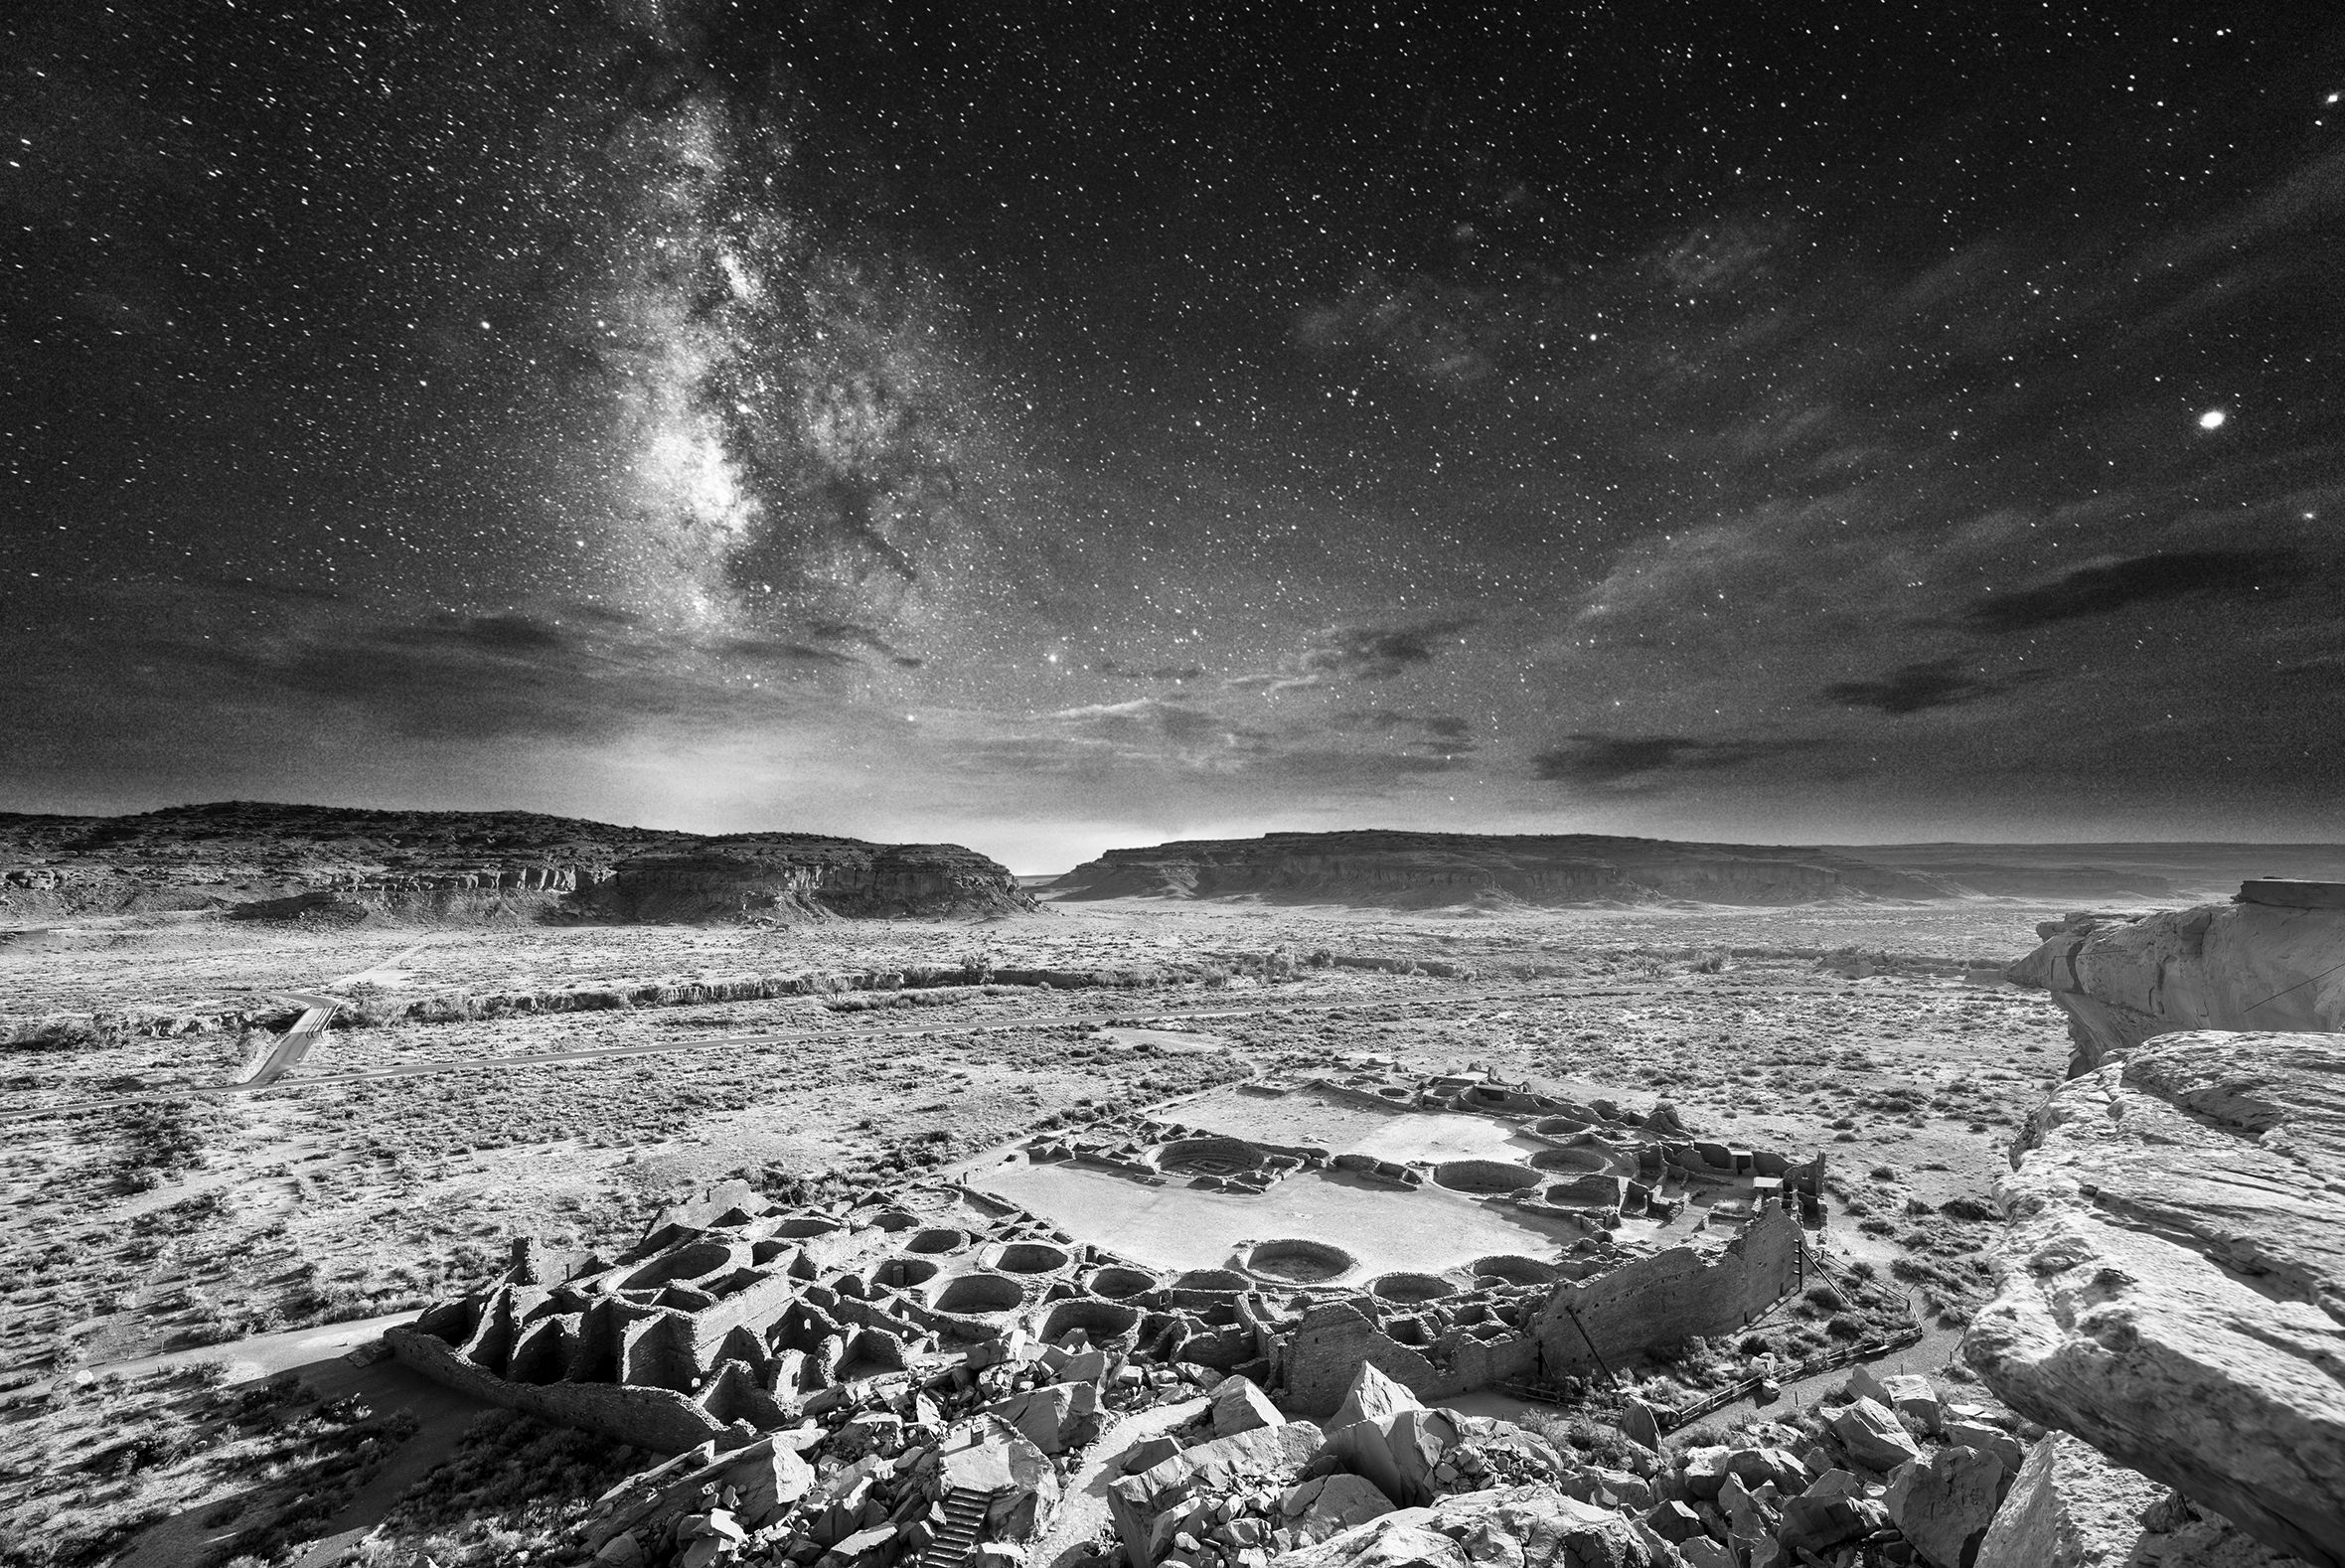 The photo titled “Ancient Nights: Evening at Pueblo Bonito” shows a top-down view of the Pueblo Bonito ruins and the surrounding landscape taken on a starry night.